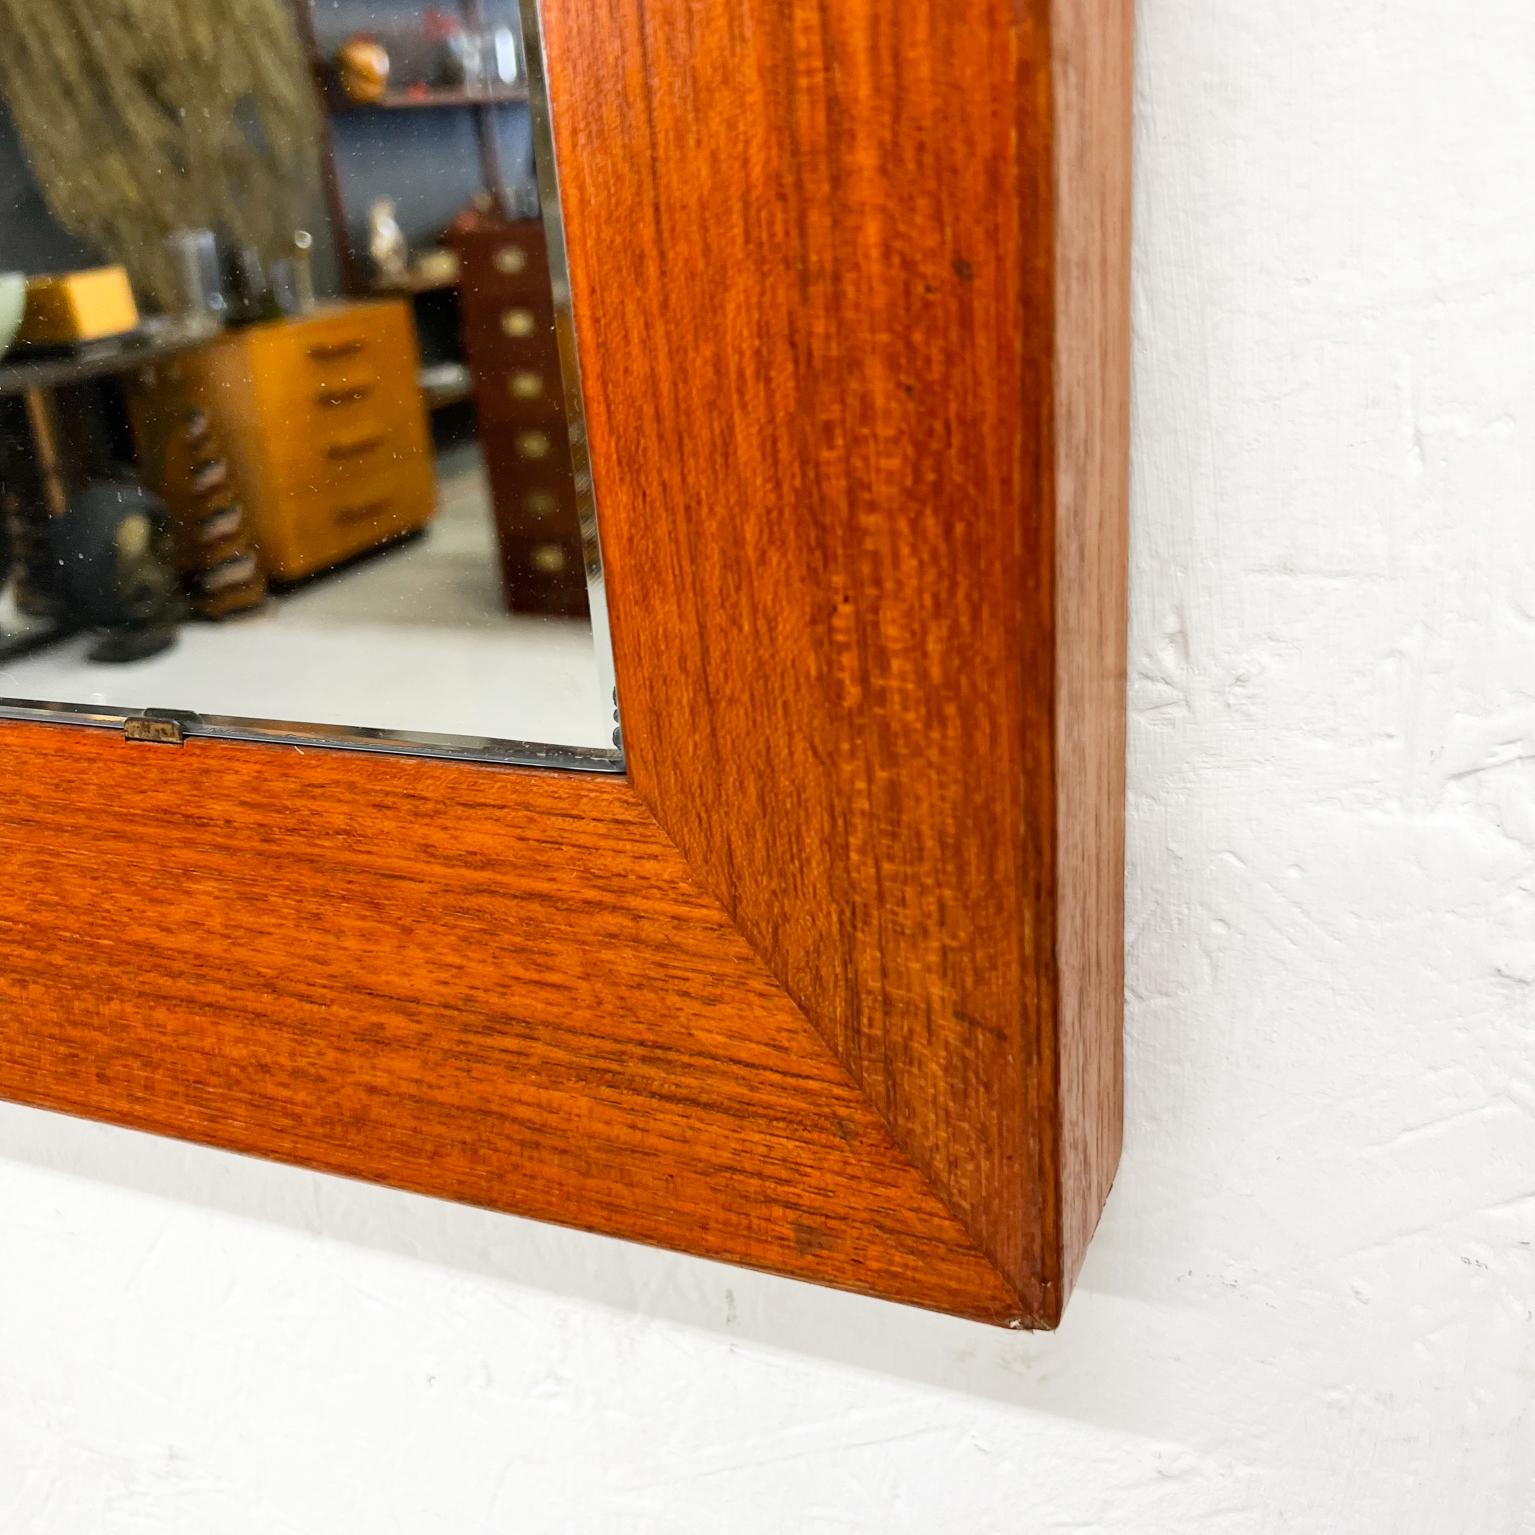 1960s Modern Teak and Sapele Wood Framed Wall Mirror In Good Condition For Sale In Chula Vista, CA